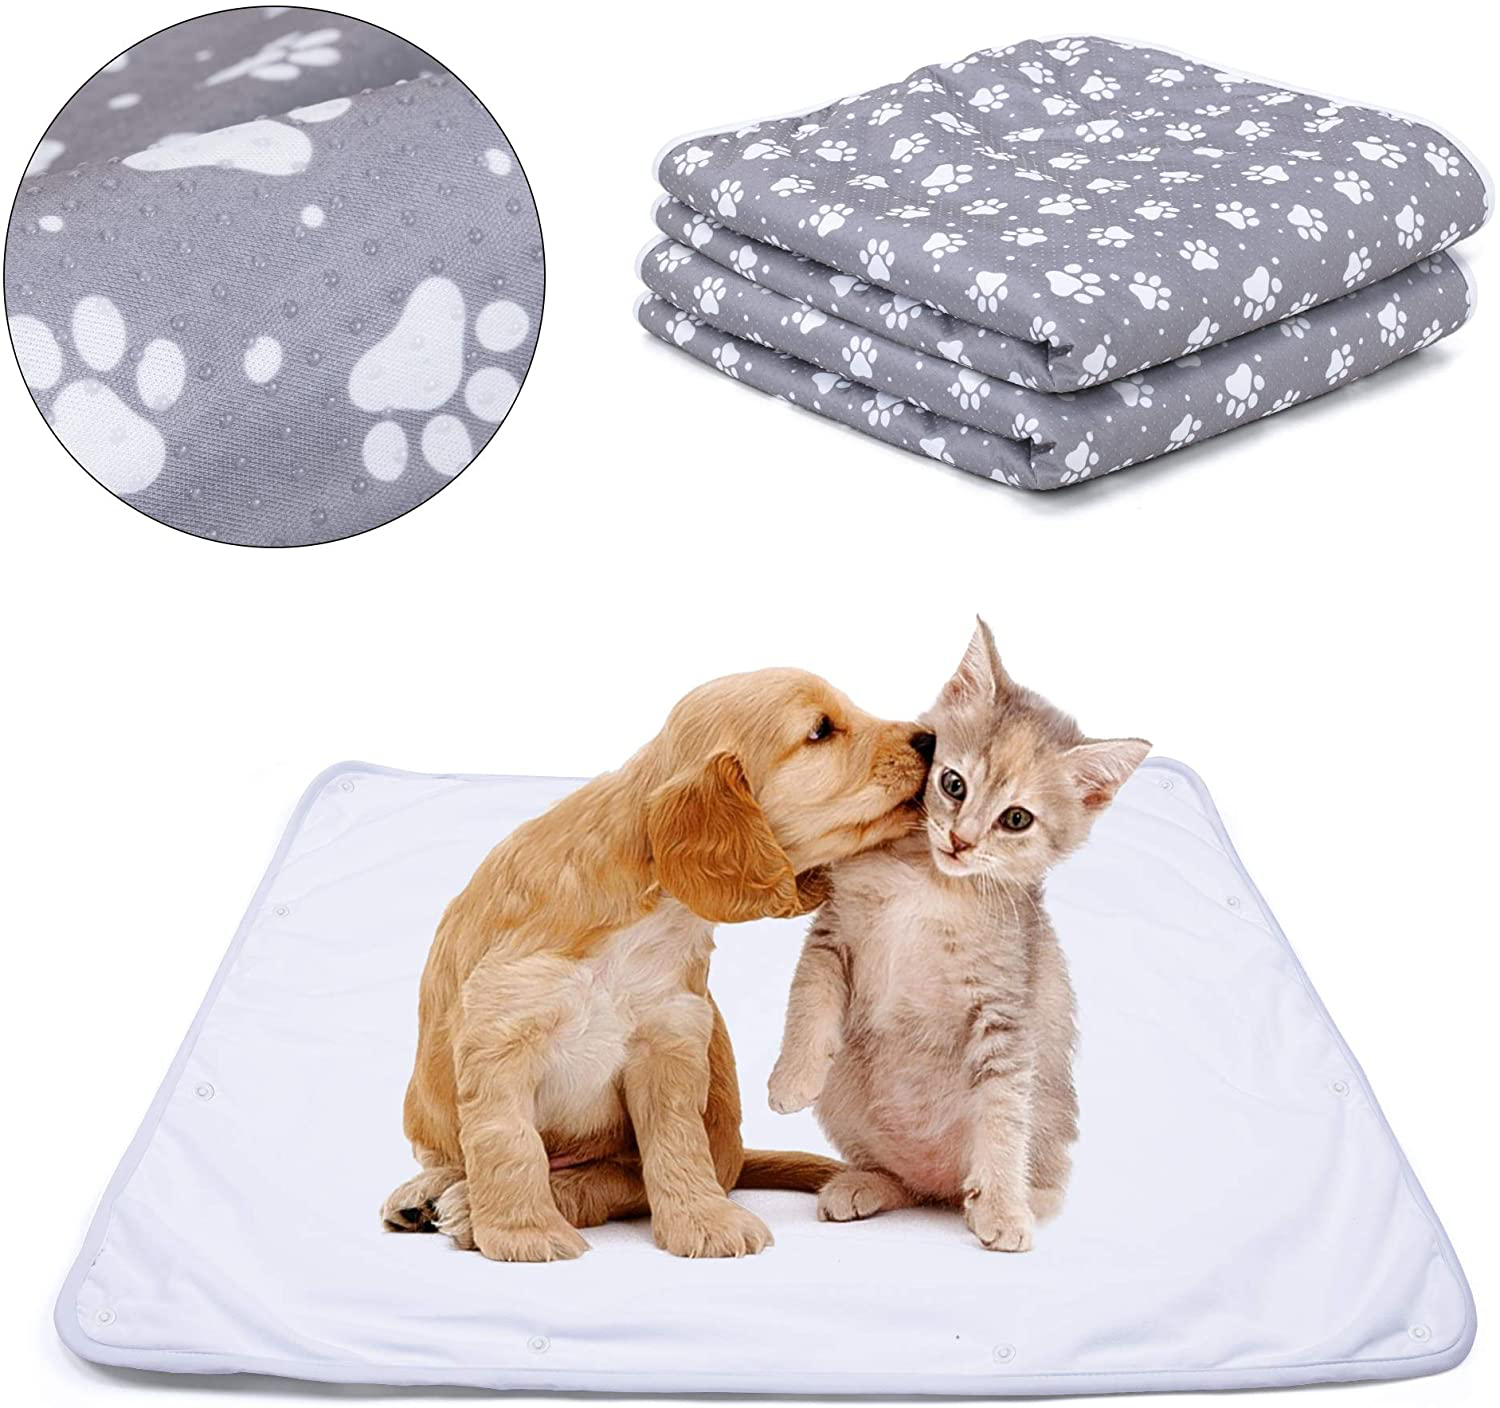 Teamoy Waterproof Non-Slip Dog Blankets (Pack of 2), Pet Fleece Incontinence Pee Blanket Pad for Dogs